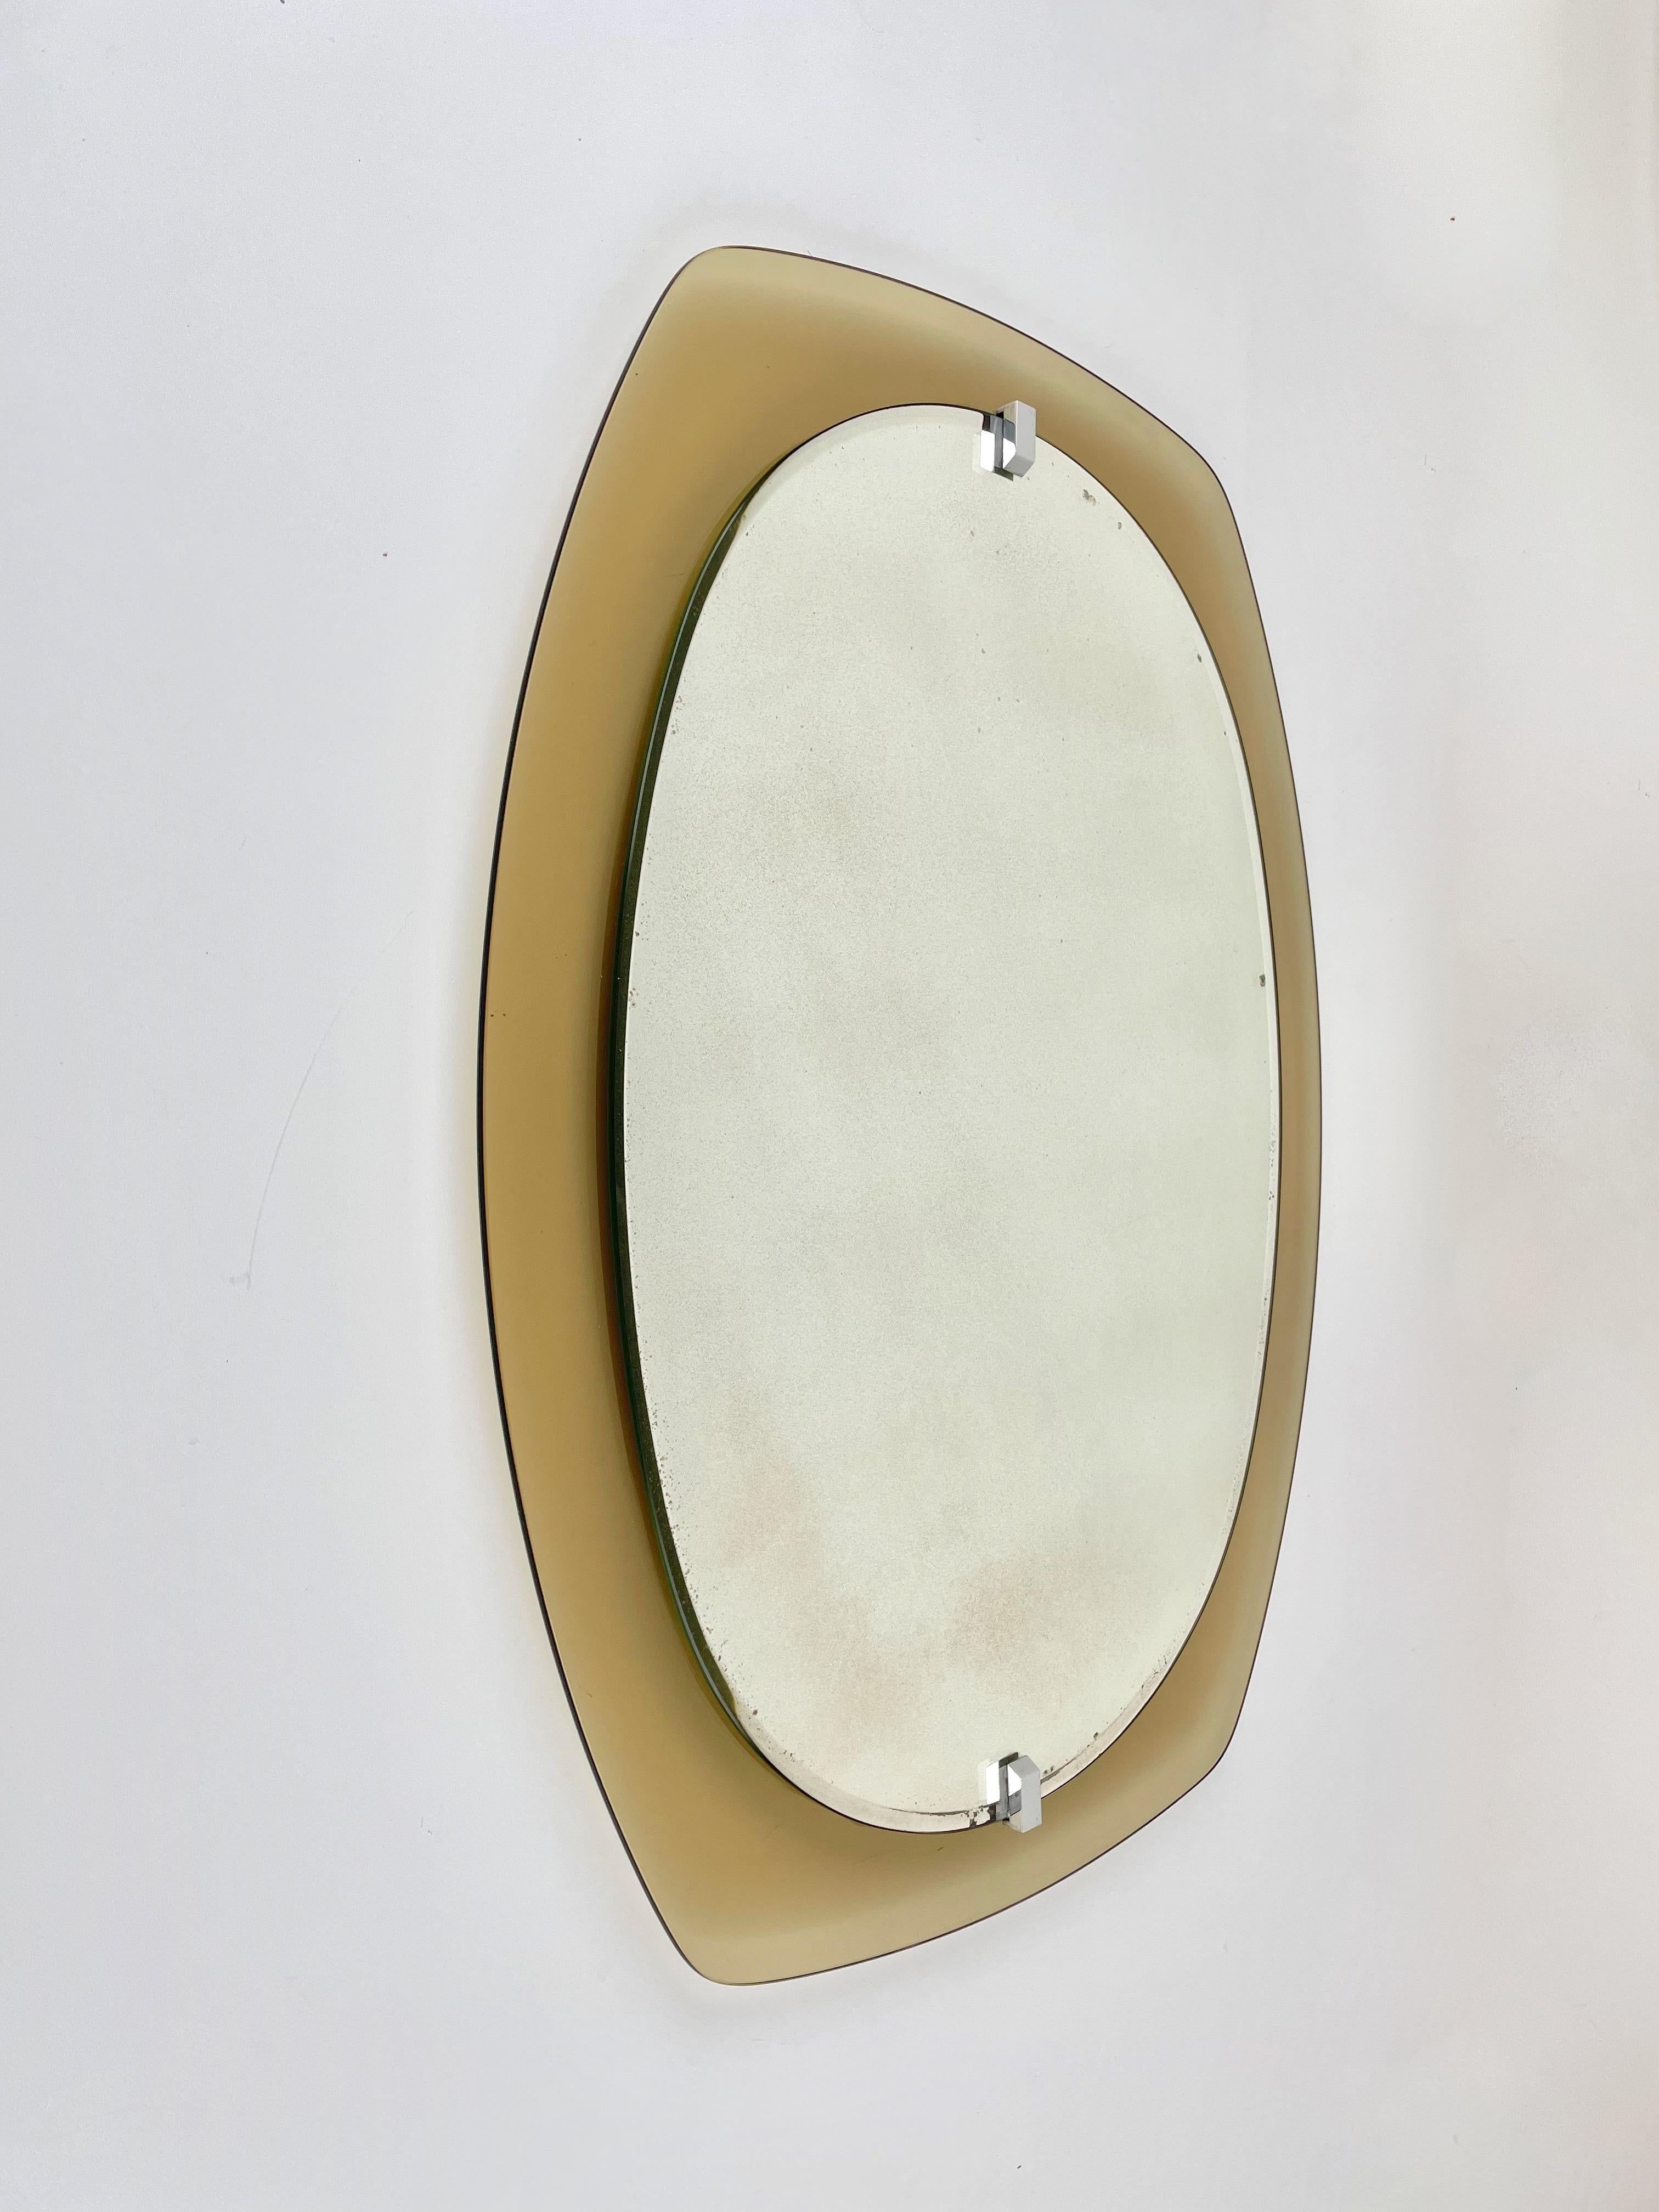 Mid-Century Modern wall mirror by Veca in smoked glass with chrome details. Made in Italy in the 1970s. 
It has its original foil label still attached on the back.